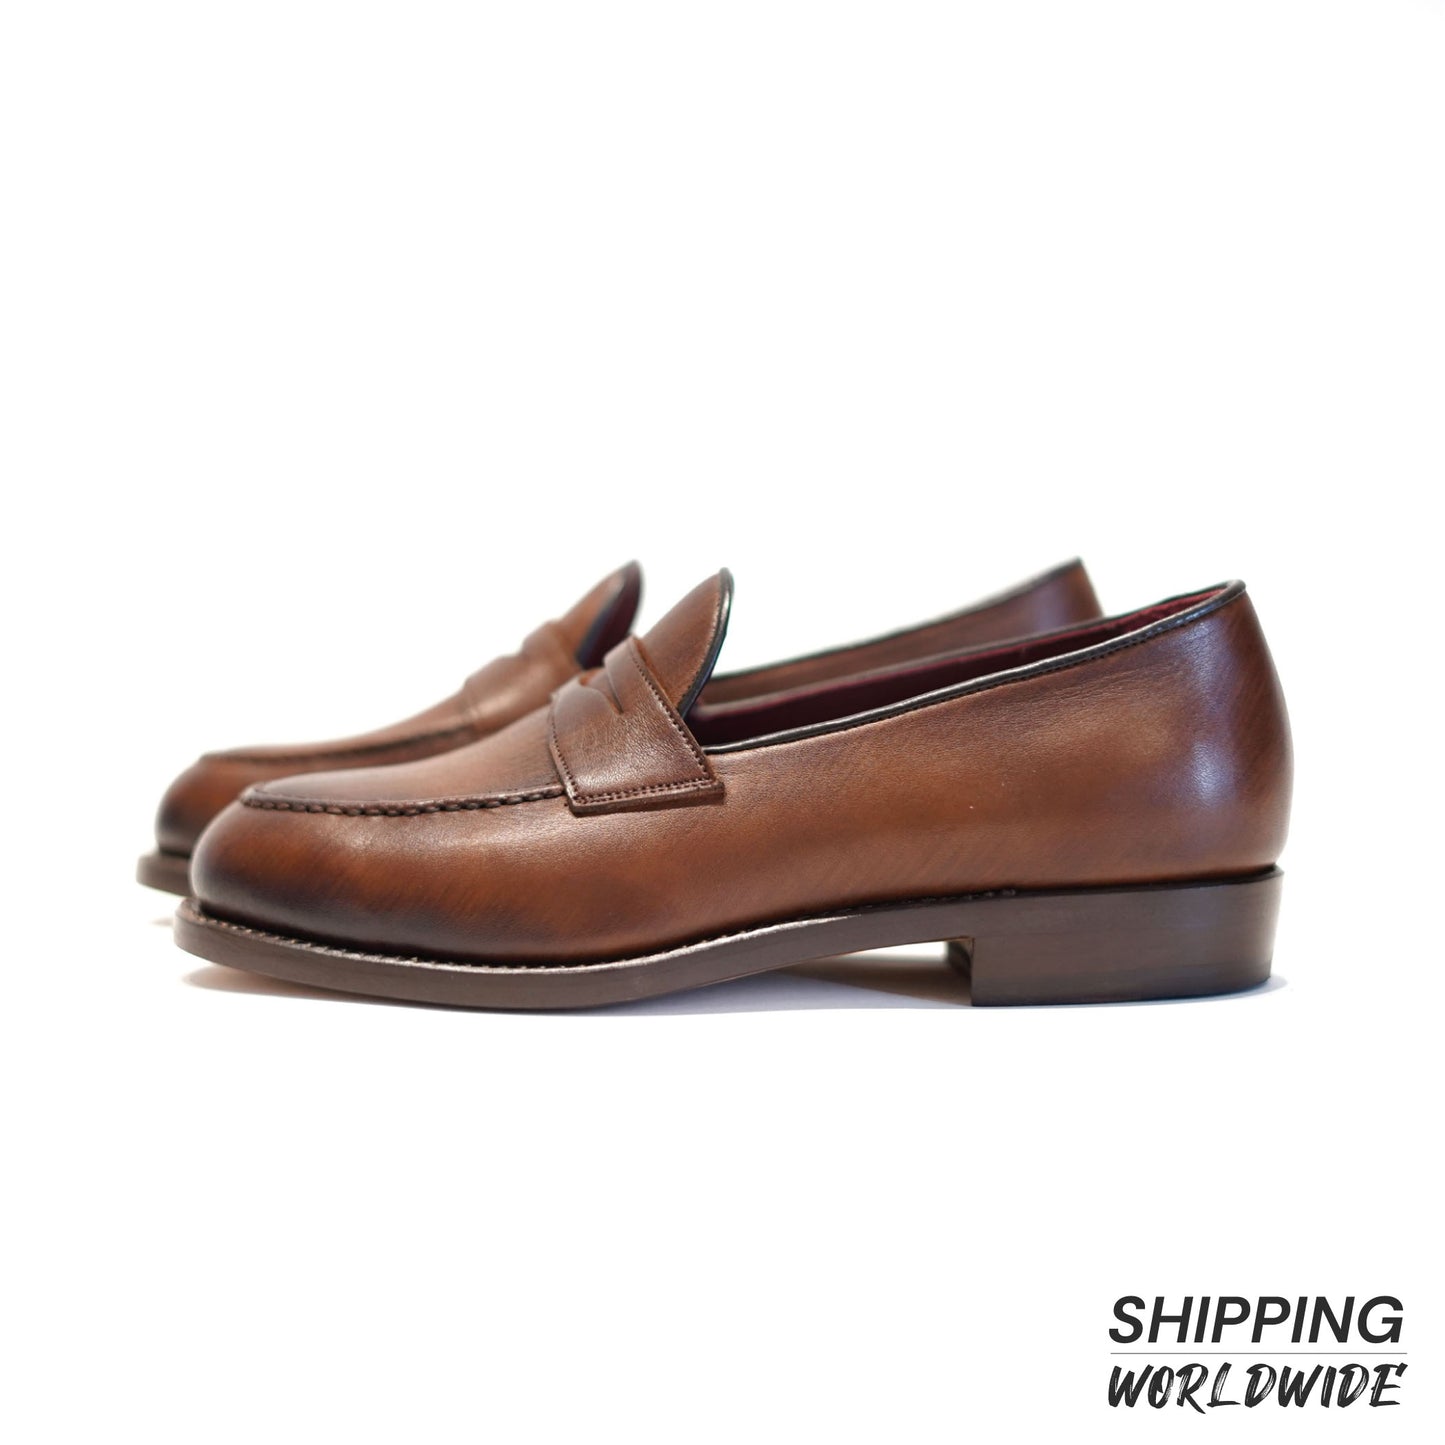 ML Penny Loafer - Tobacco